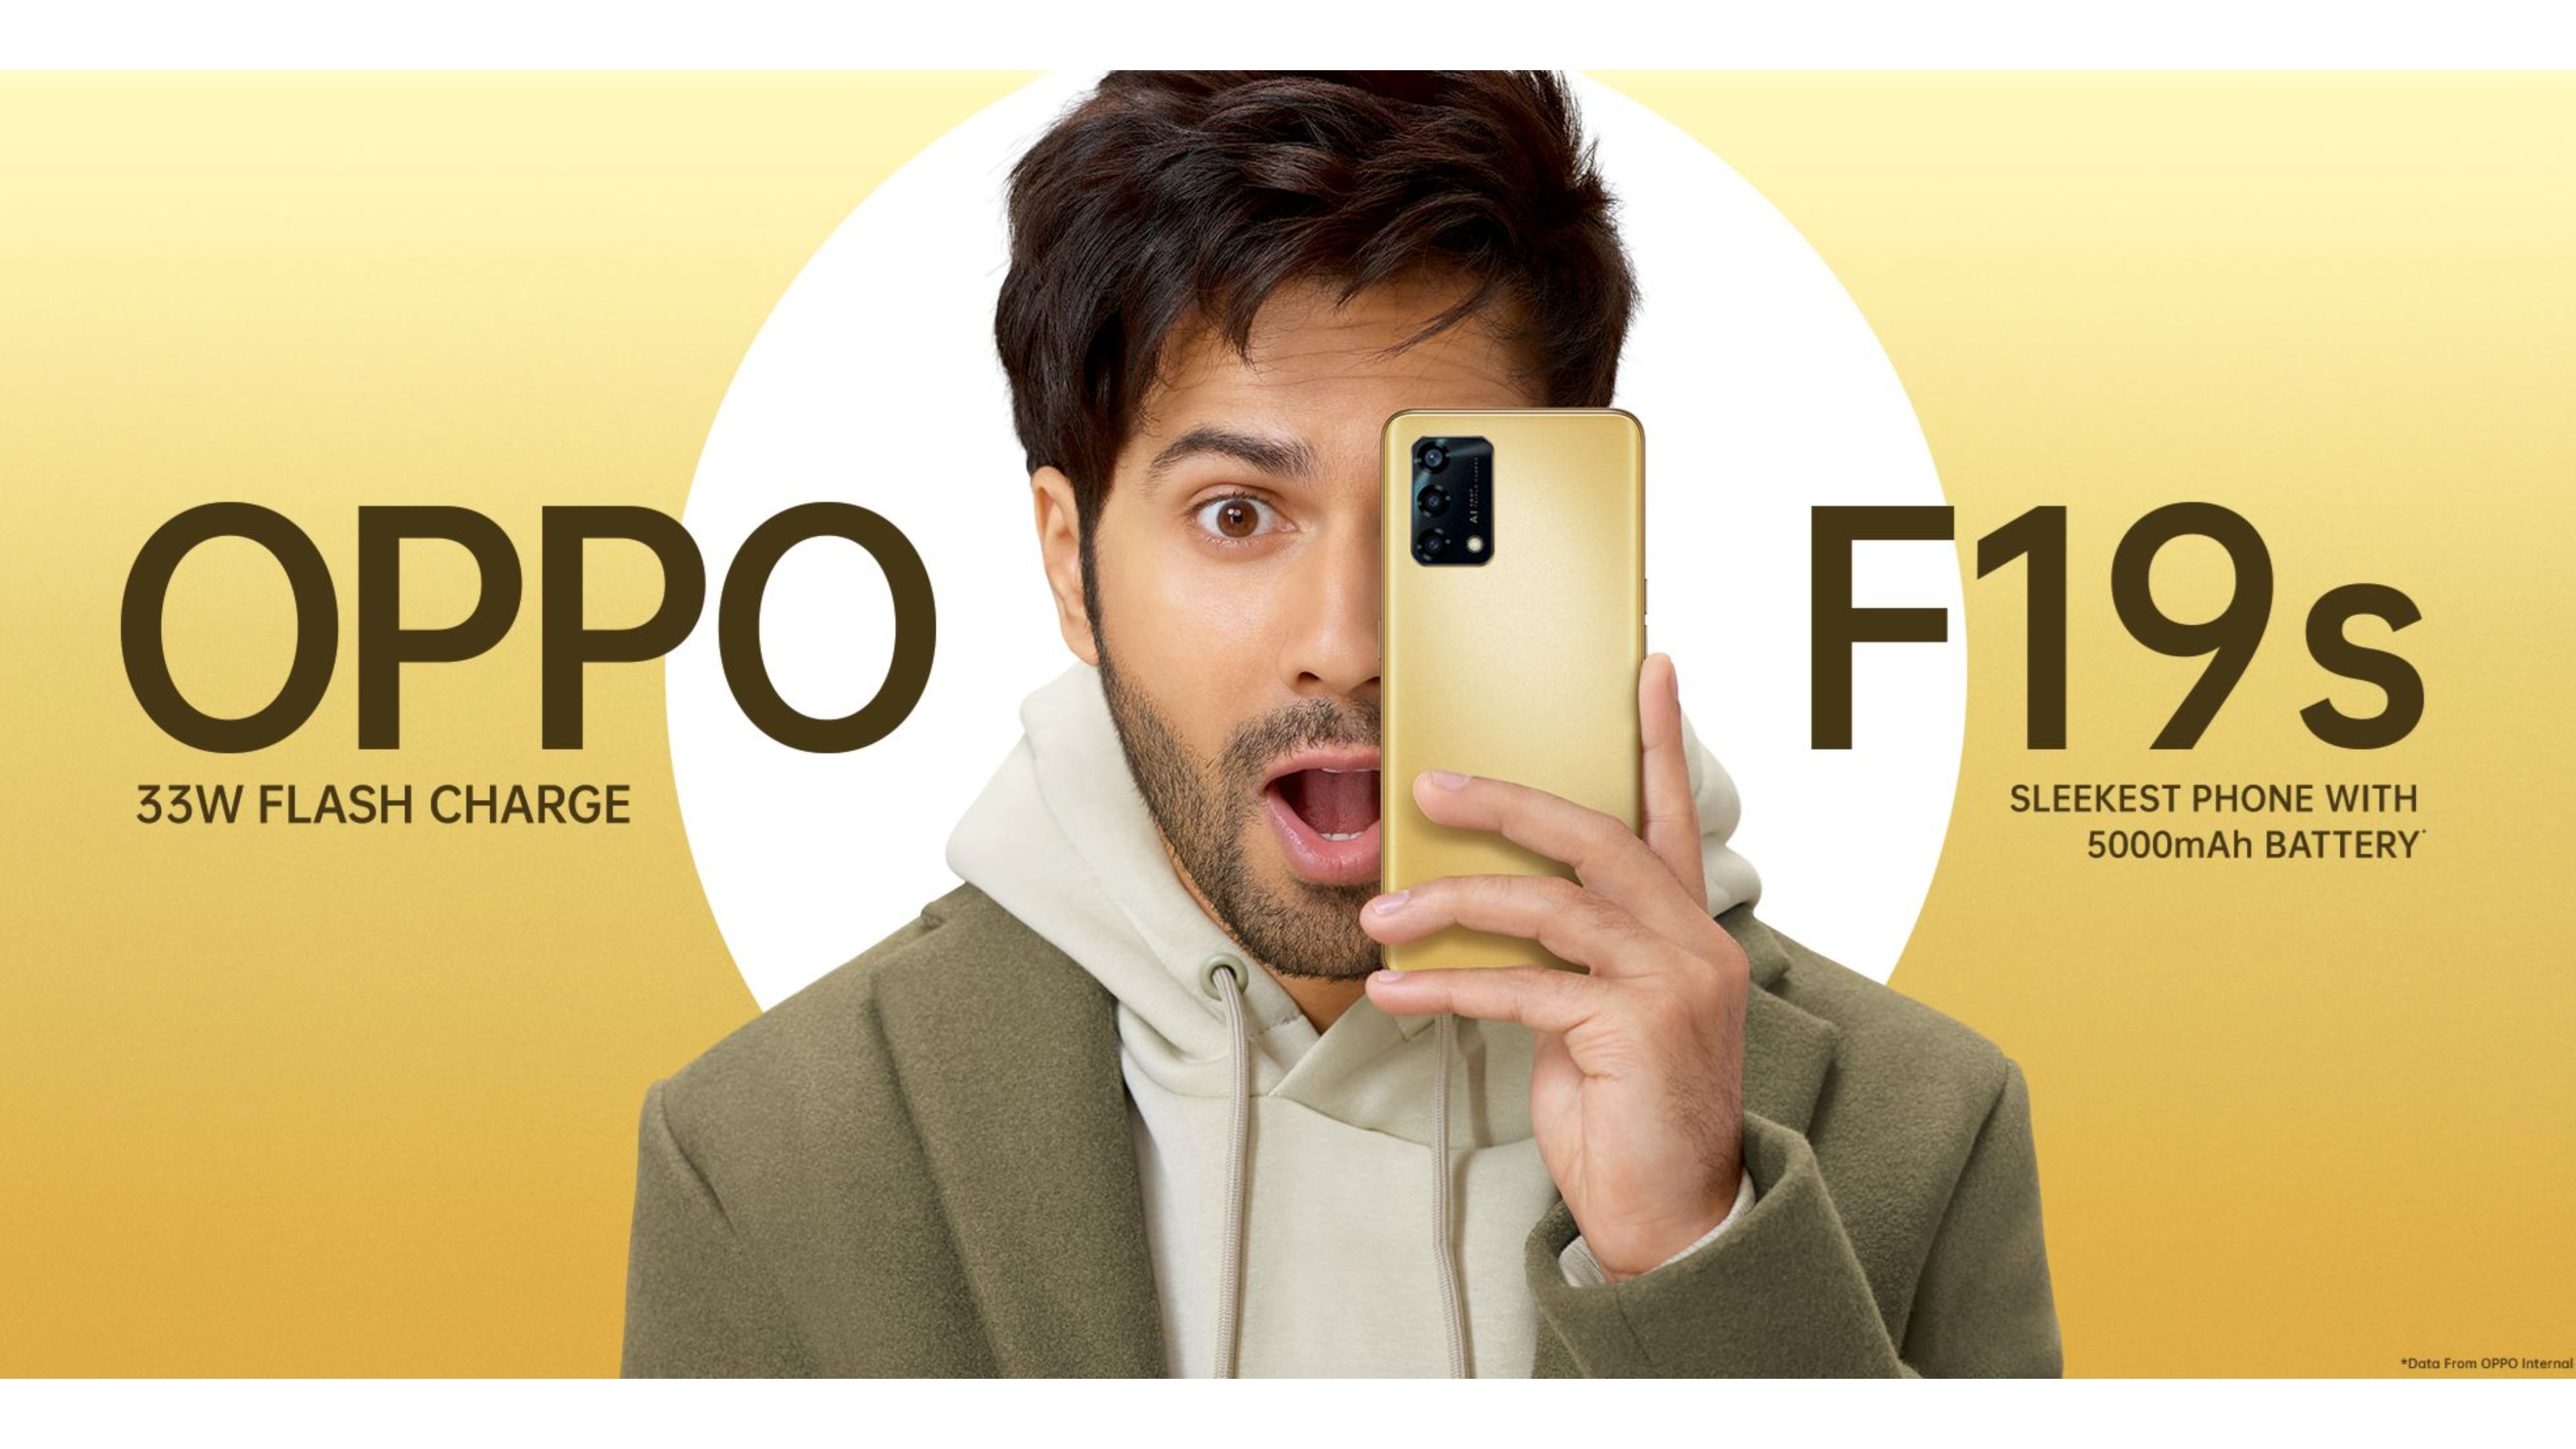 OPPO F19s Teaser Featured